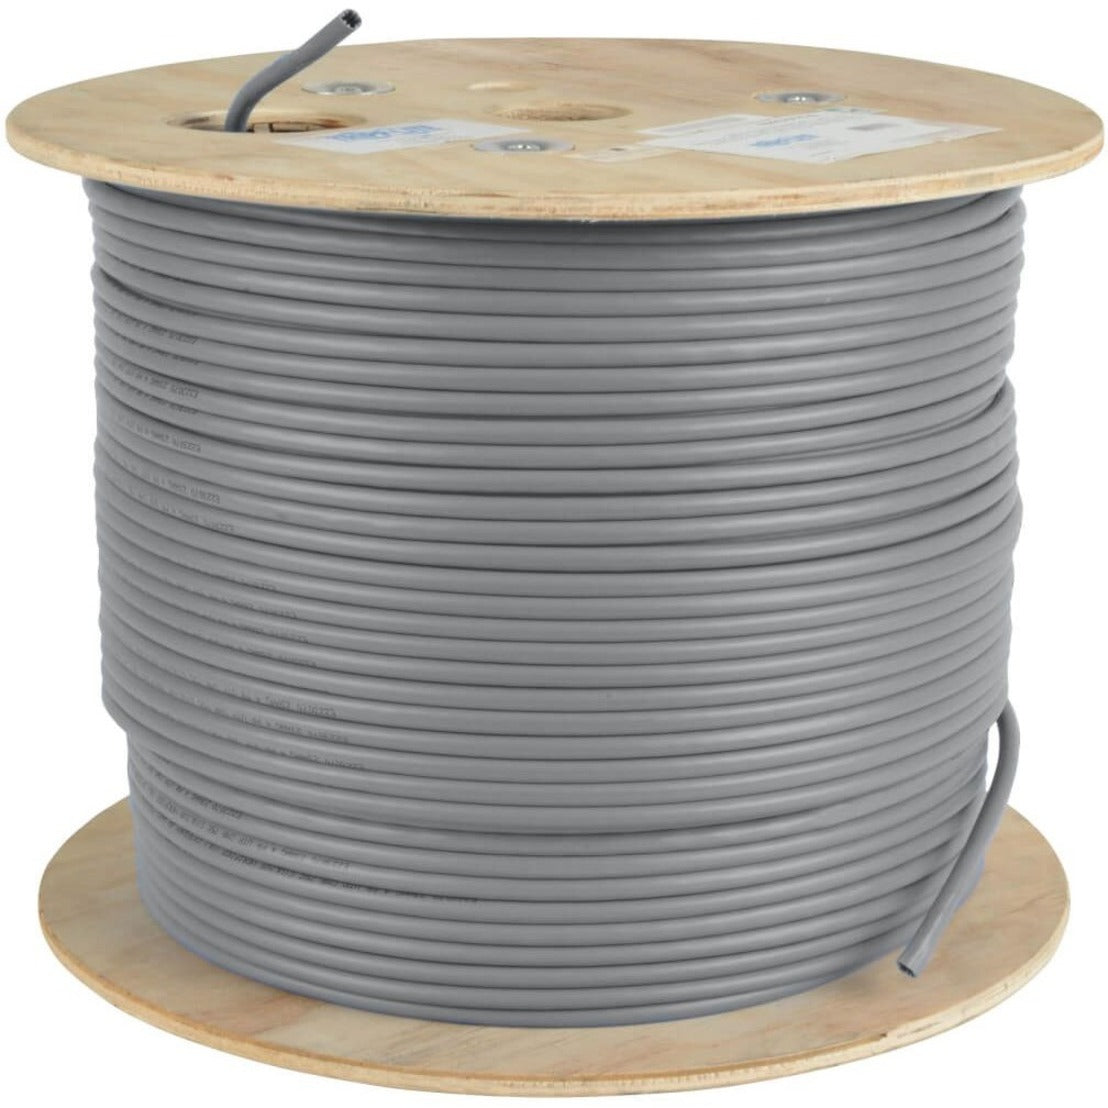 Tripp Lite N020-01K-GY Cat5e Bulk Cable, 1000-ft. Gray Patch Cable for High-Speed Networking